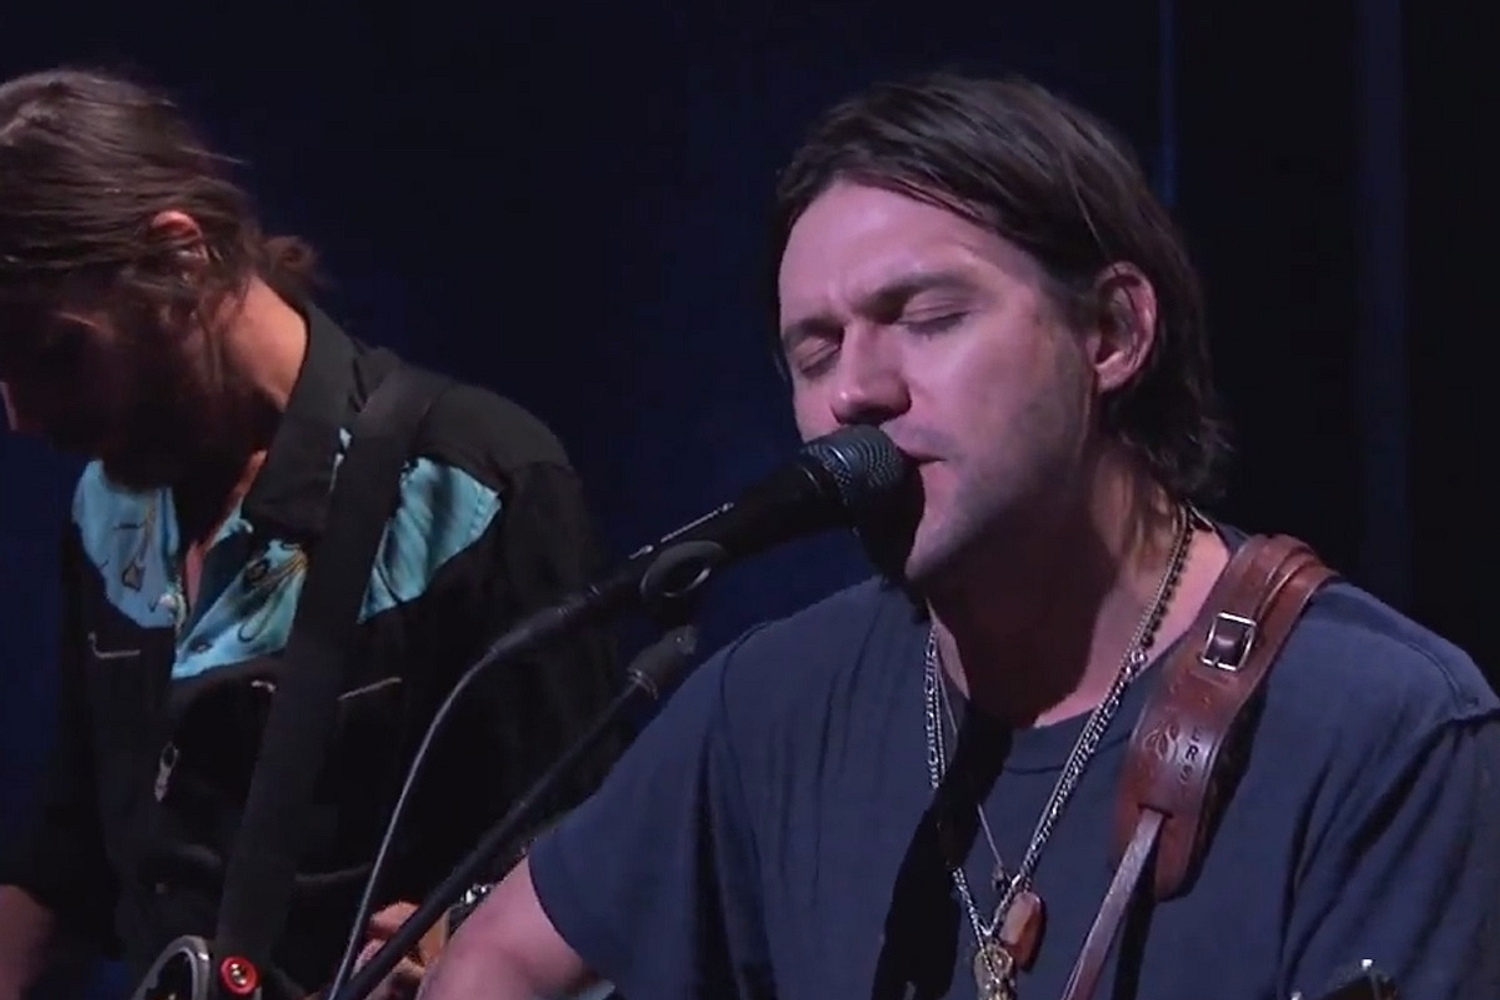 Watch Conor Oberst perform two tracks on Kimmel